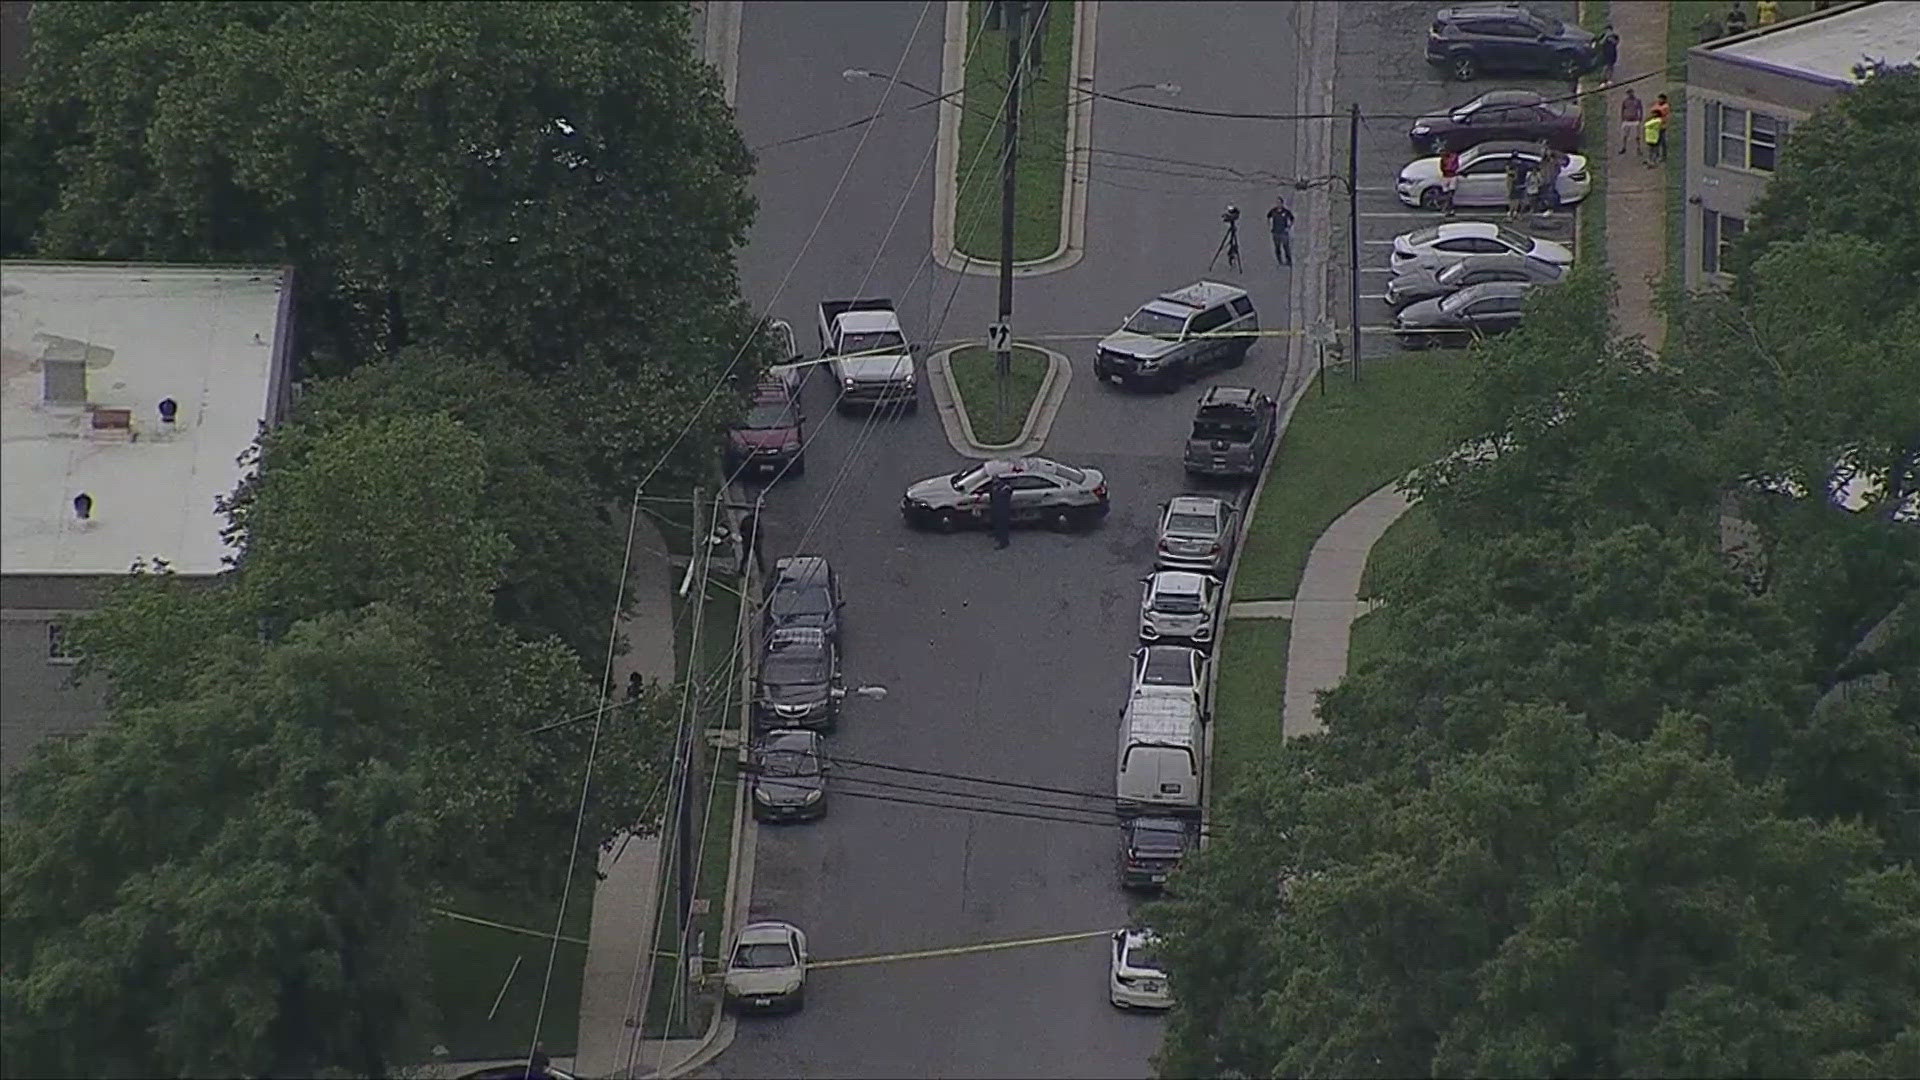 SKY9 is over the scene of a deadly shooting in Adelphi. This is off of Erie Street near Adelphi Road.